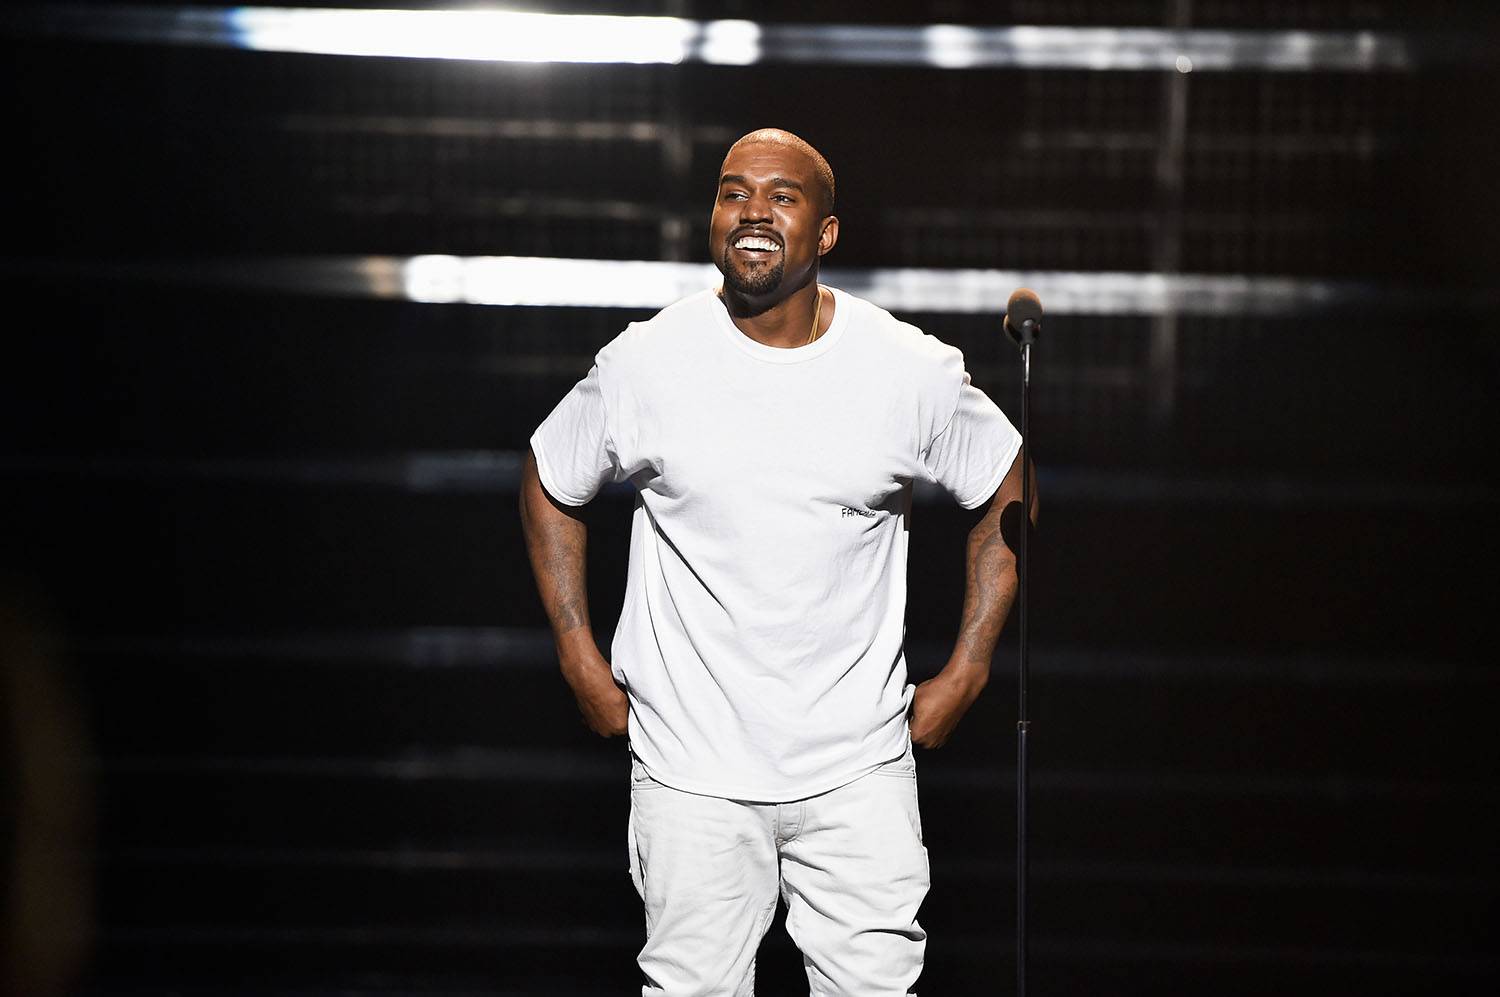 Kanye West Collaborator, Vory, Claims the Rapper Is Taking a Year Off